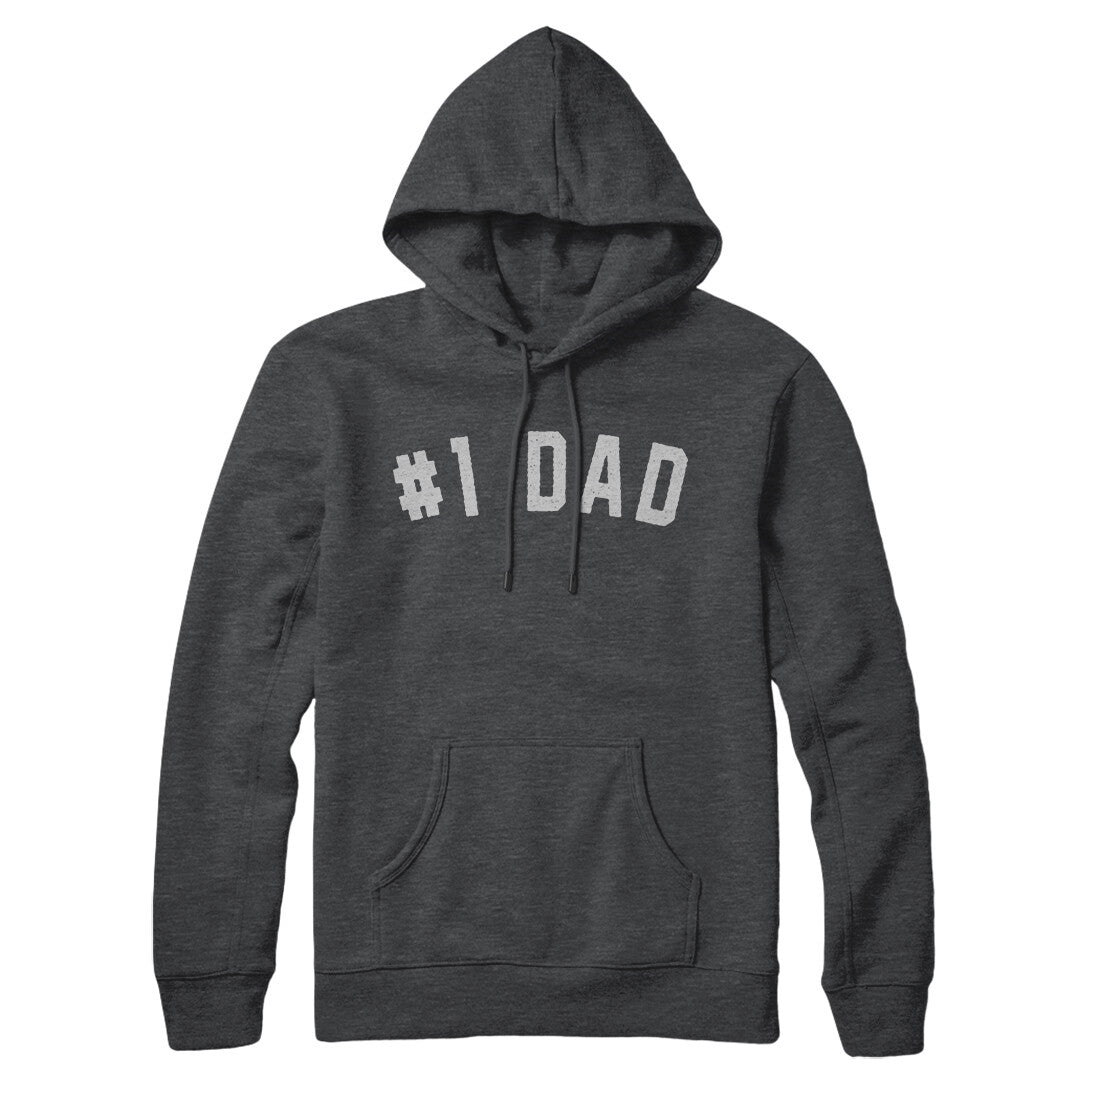 Number 1 Dad in Charcoal Heather Color